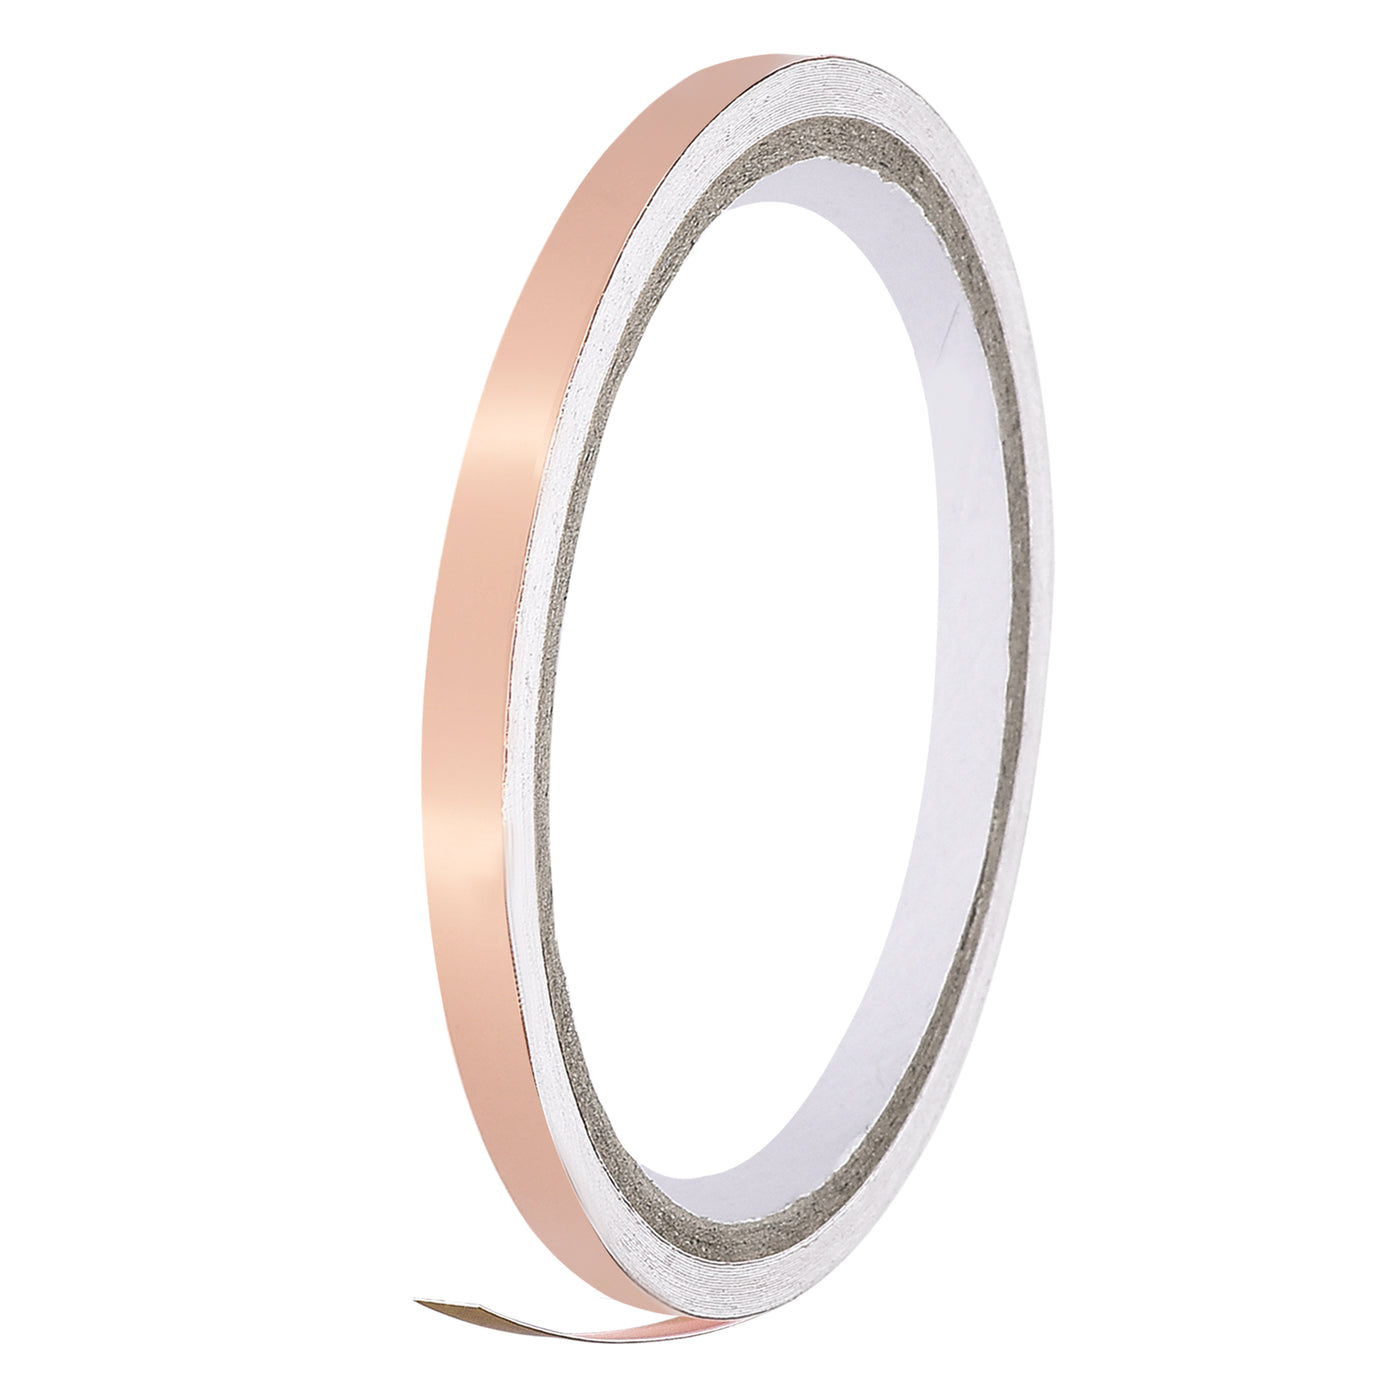 uxcell Uxcell Single-Sided Conductive Tape Copper Foil Tape 10mm x 5m/16.4ft for EMI Shielding 2pcs